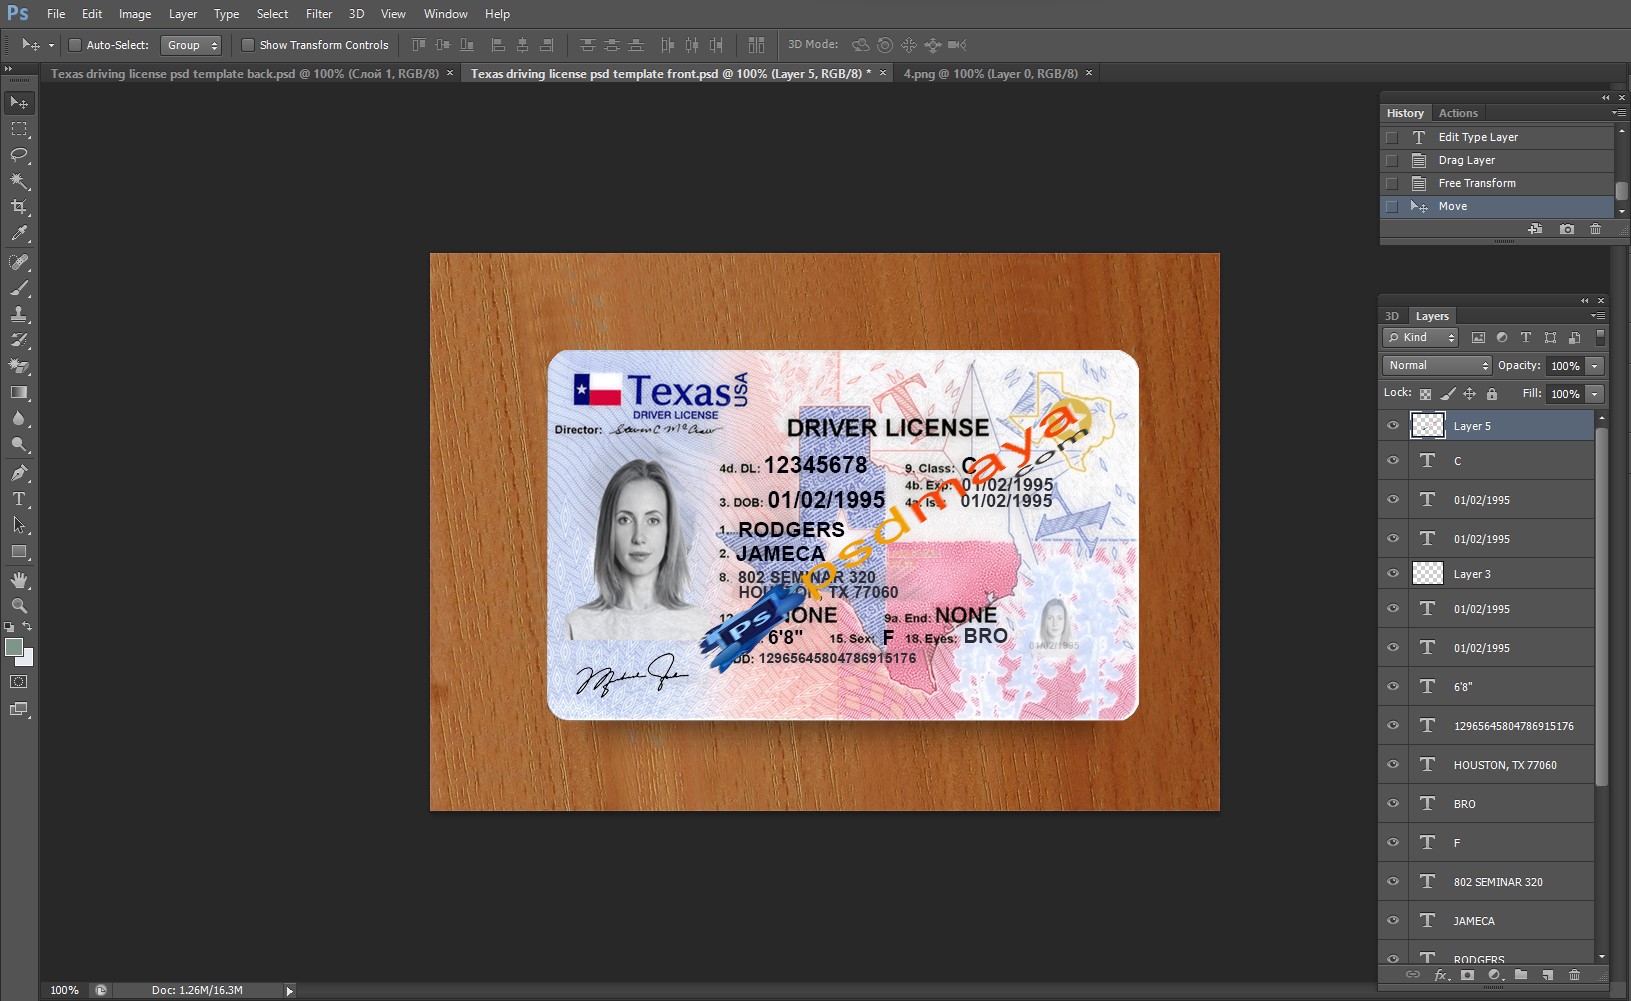 Texas driving license free psd template